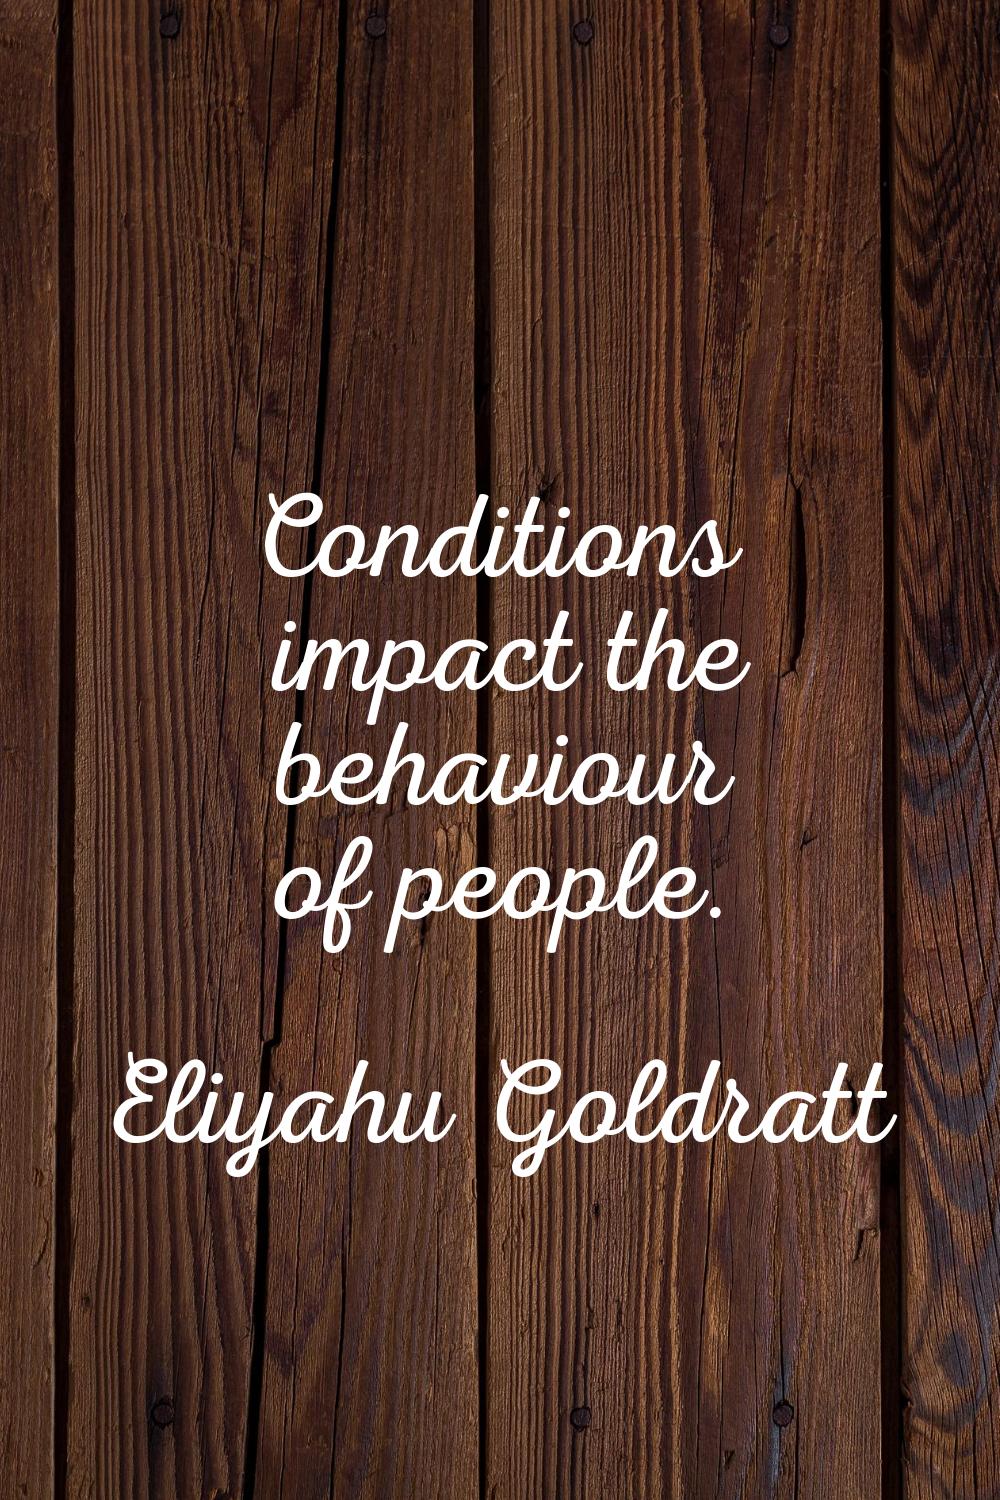 Conditions impact the behaviour of people.